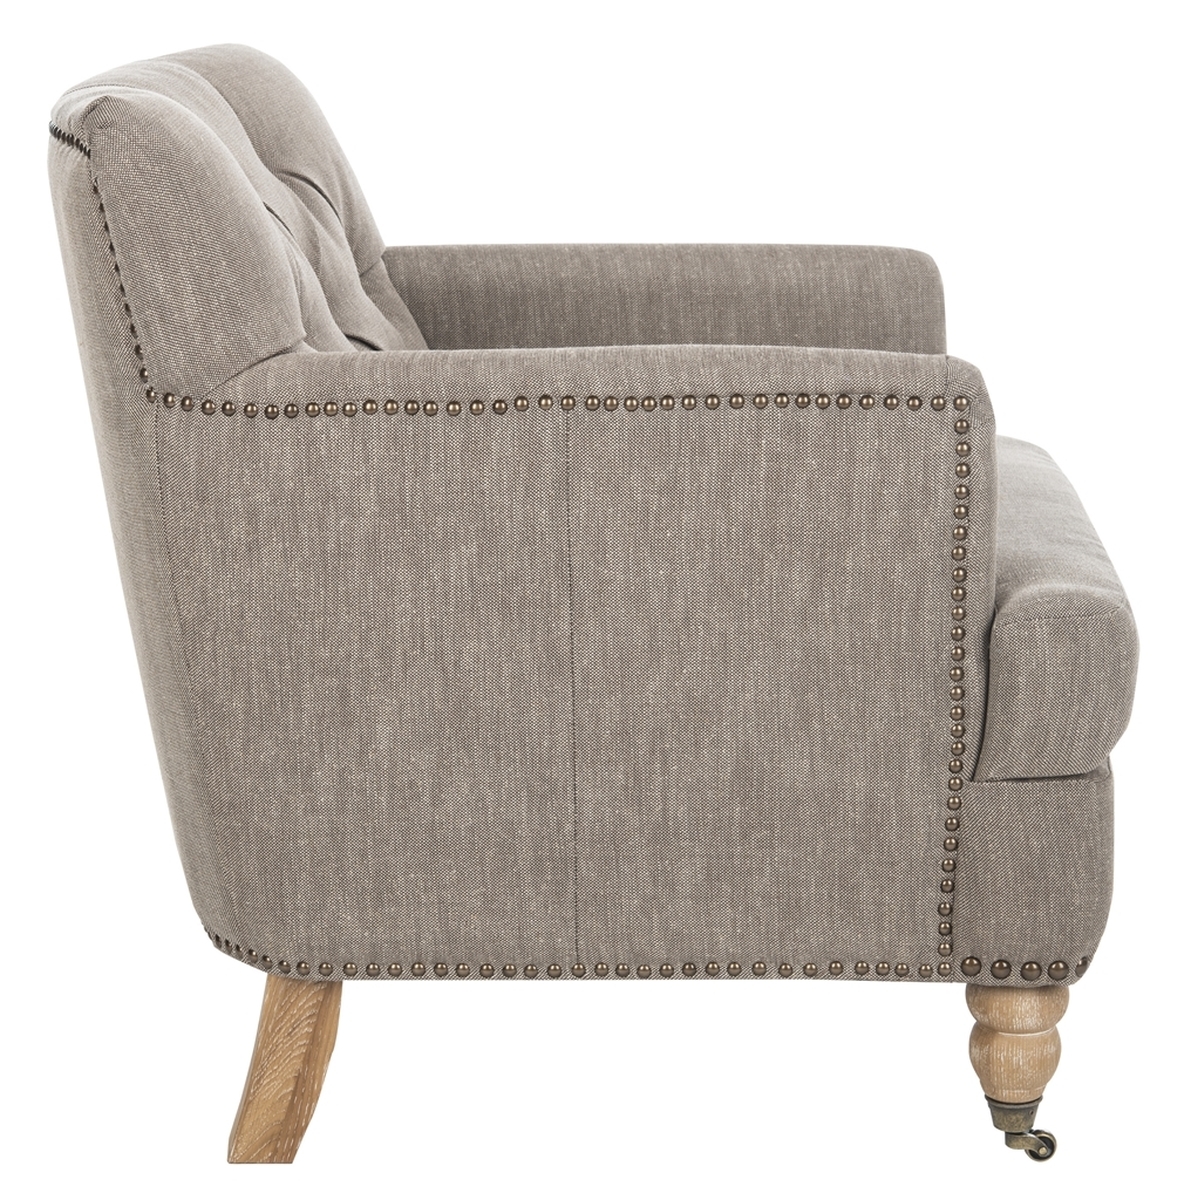 Colin Tufted Club Chair - Taupe/White Wash - Arlo Home - Image 3